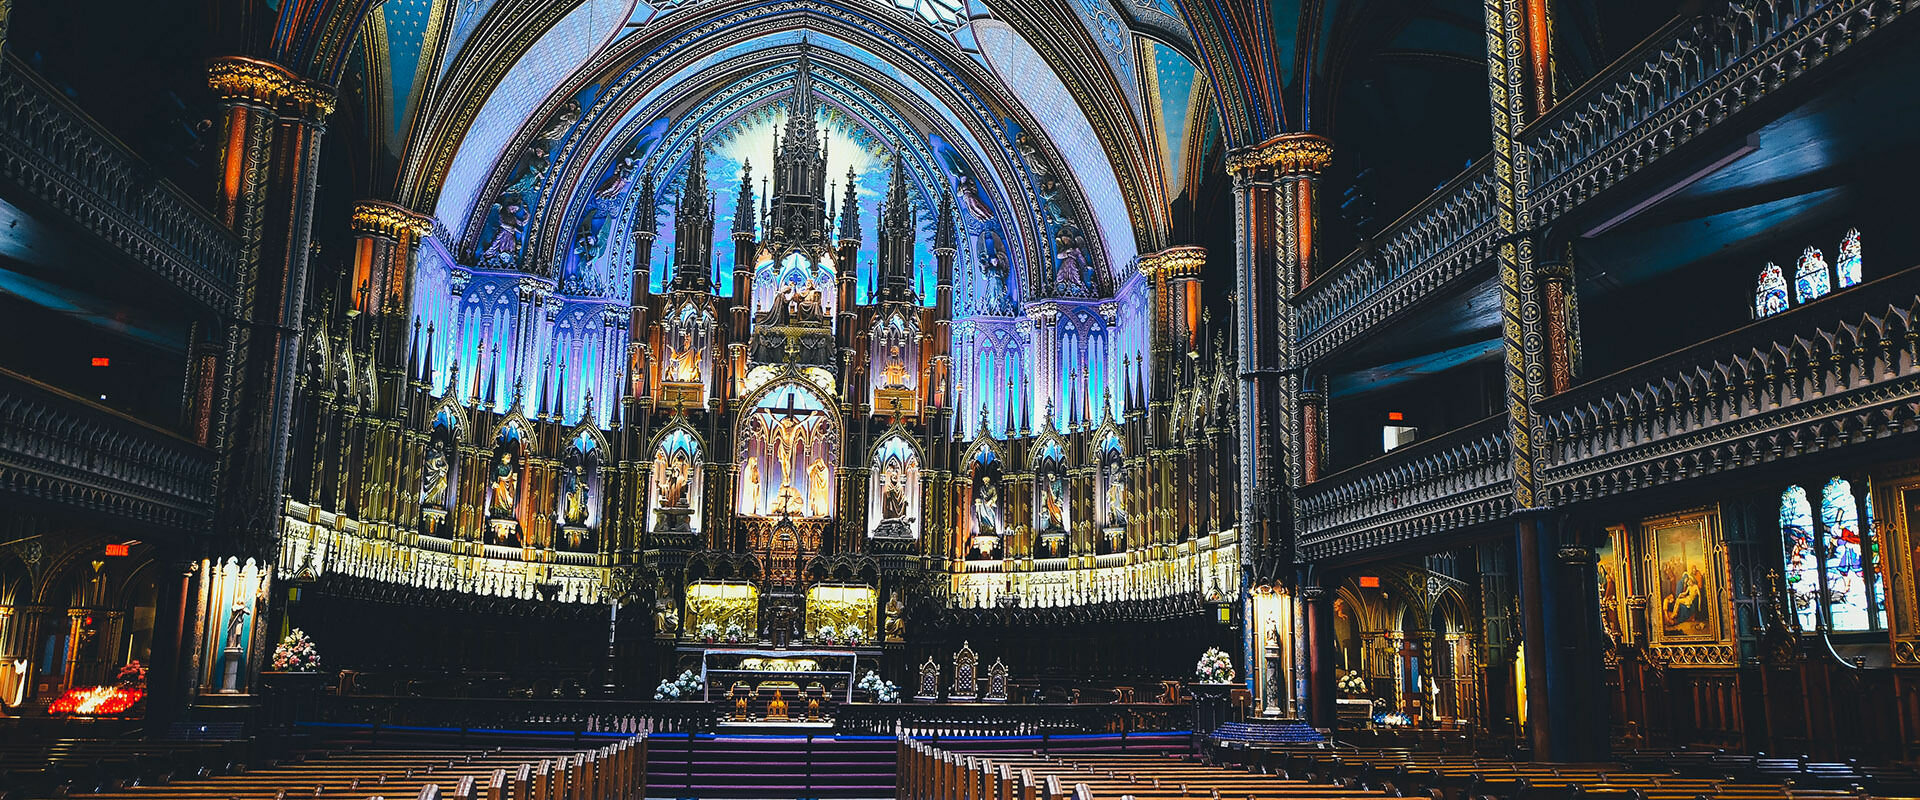 24 free or cheap things to do in Montreal: Notre Dame Basilica